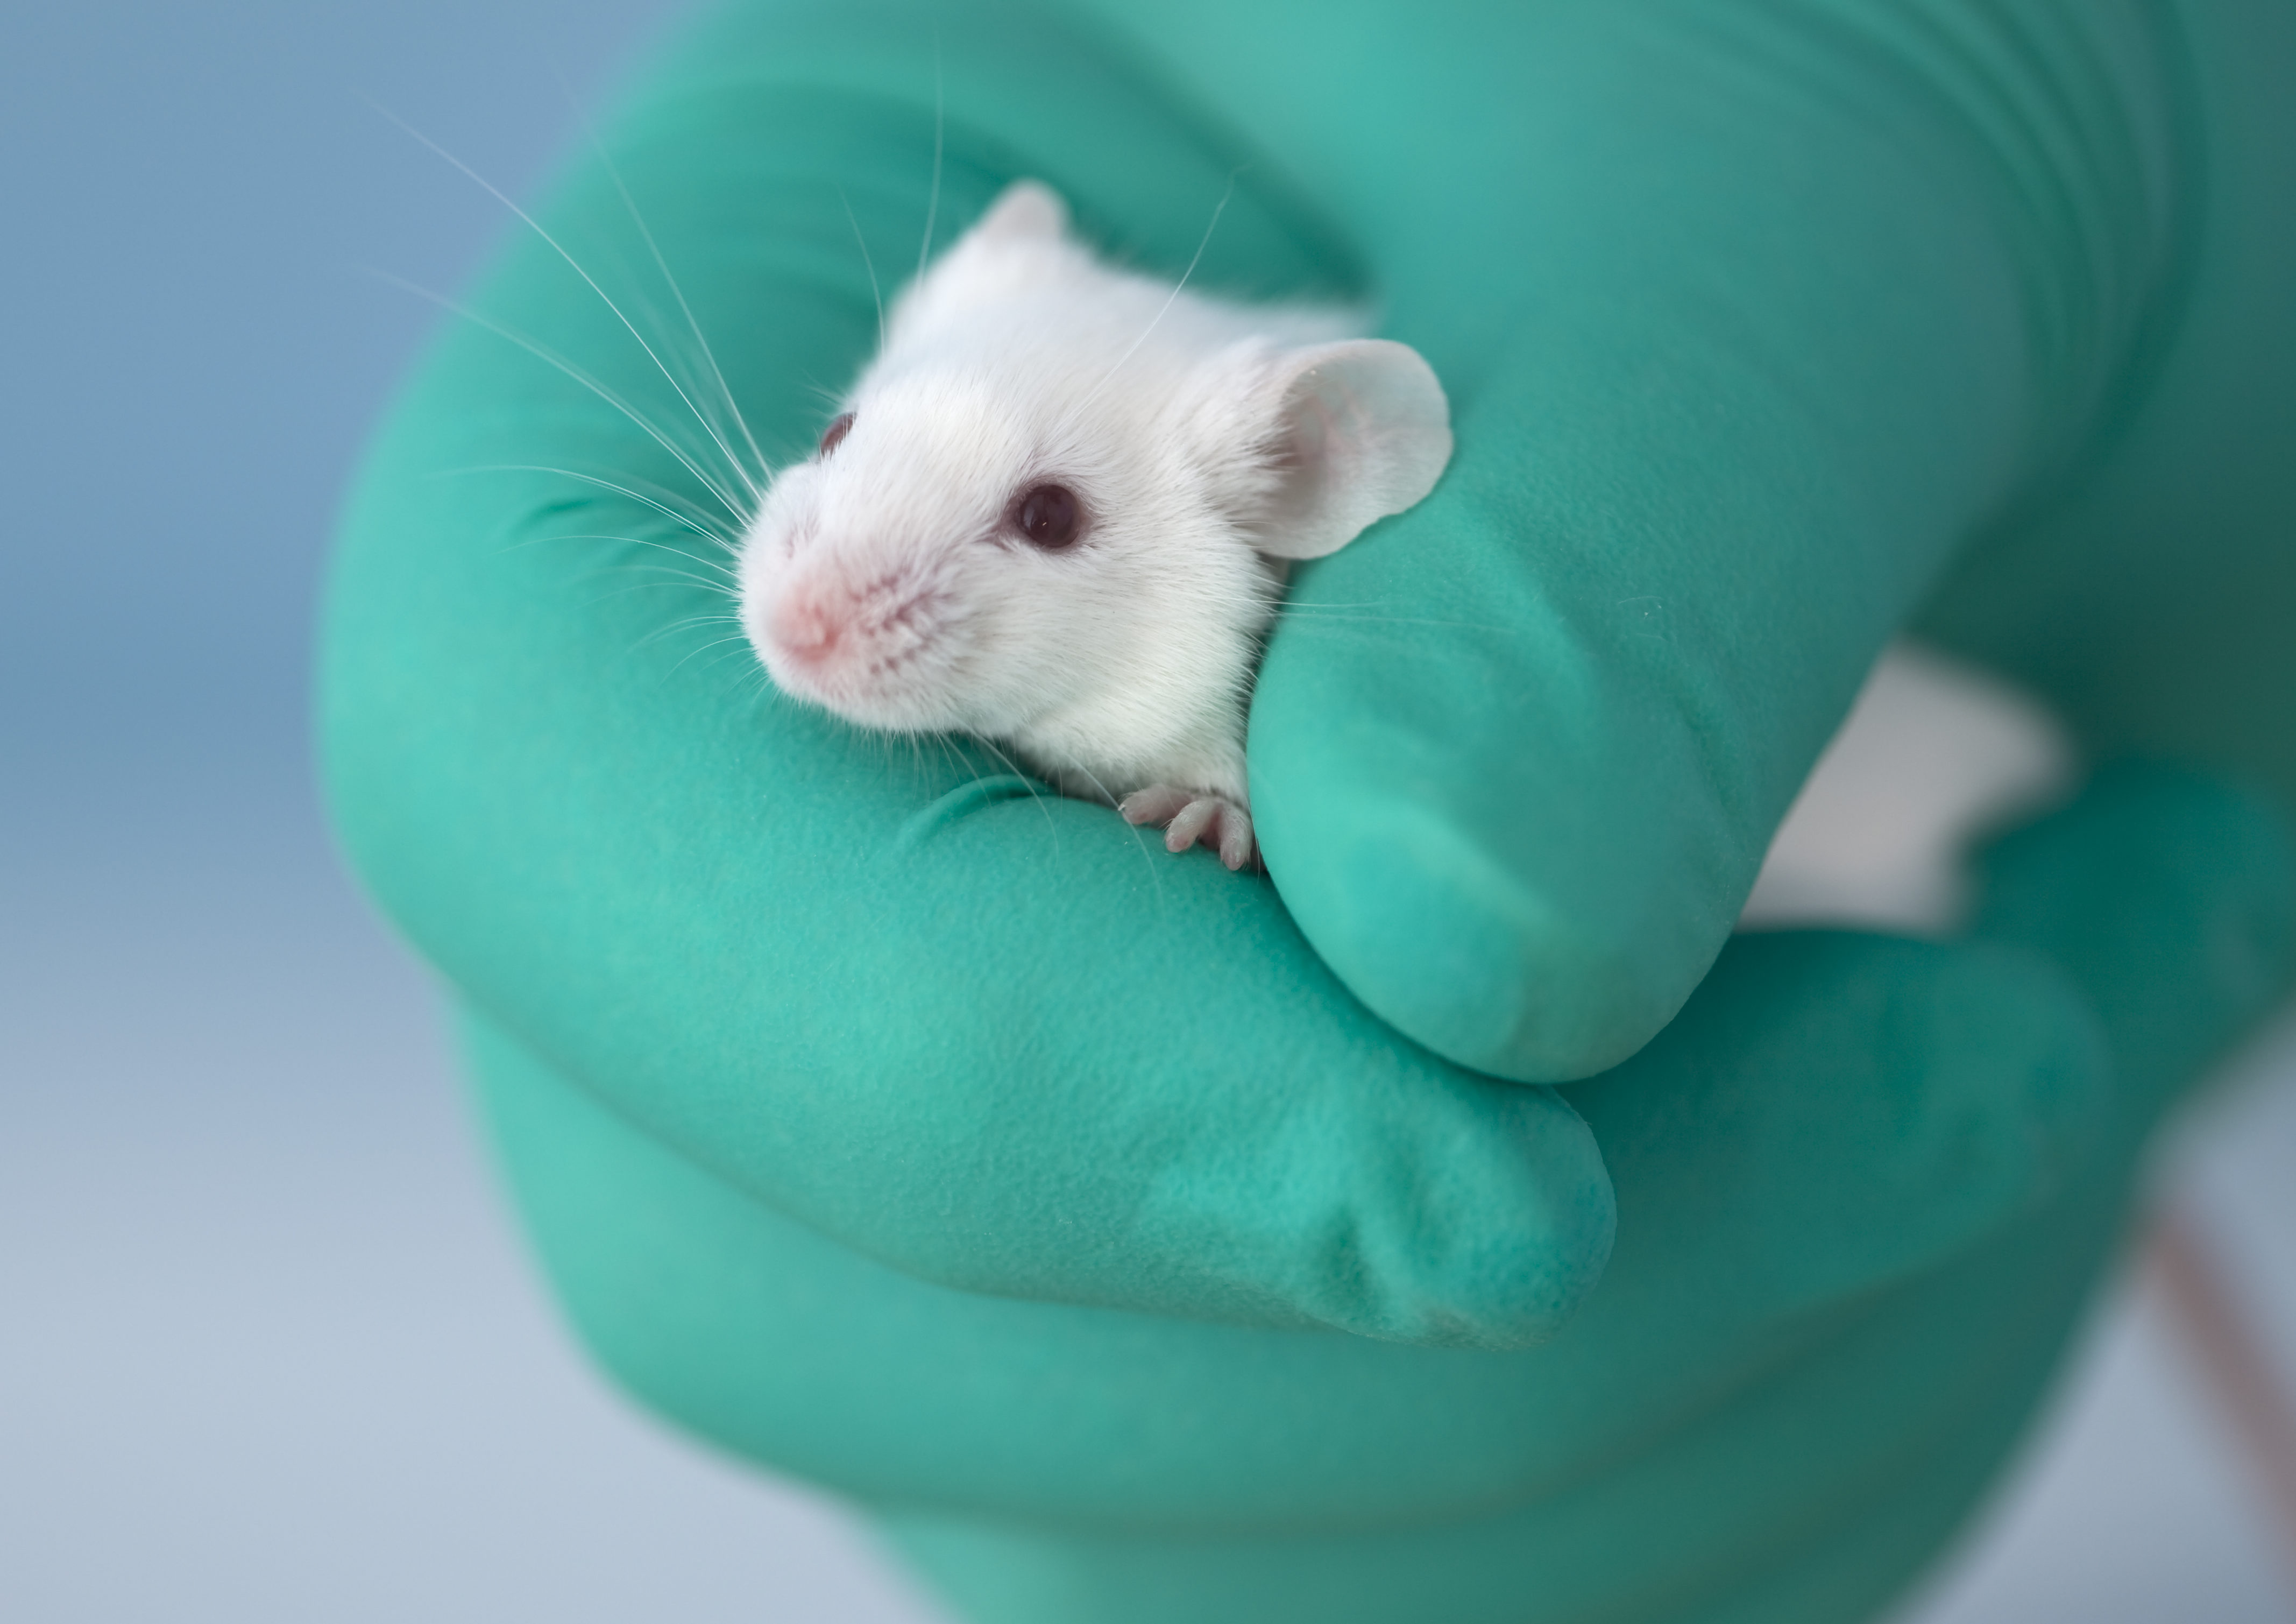 Breaking news: EPA moves to end animal testing · A Humane World